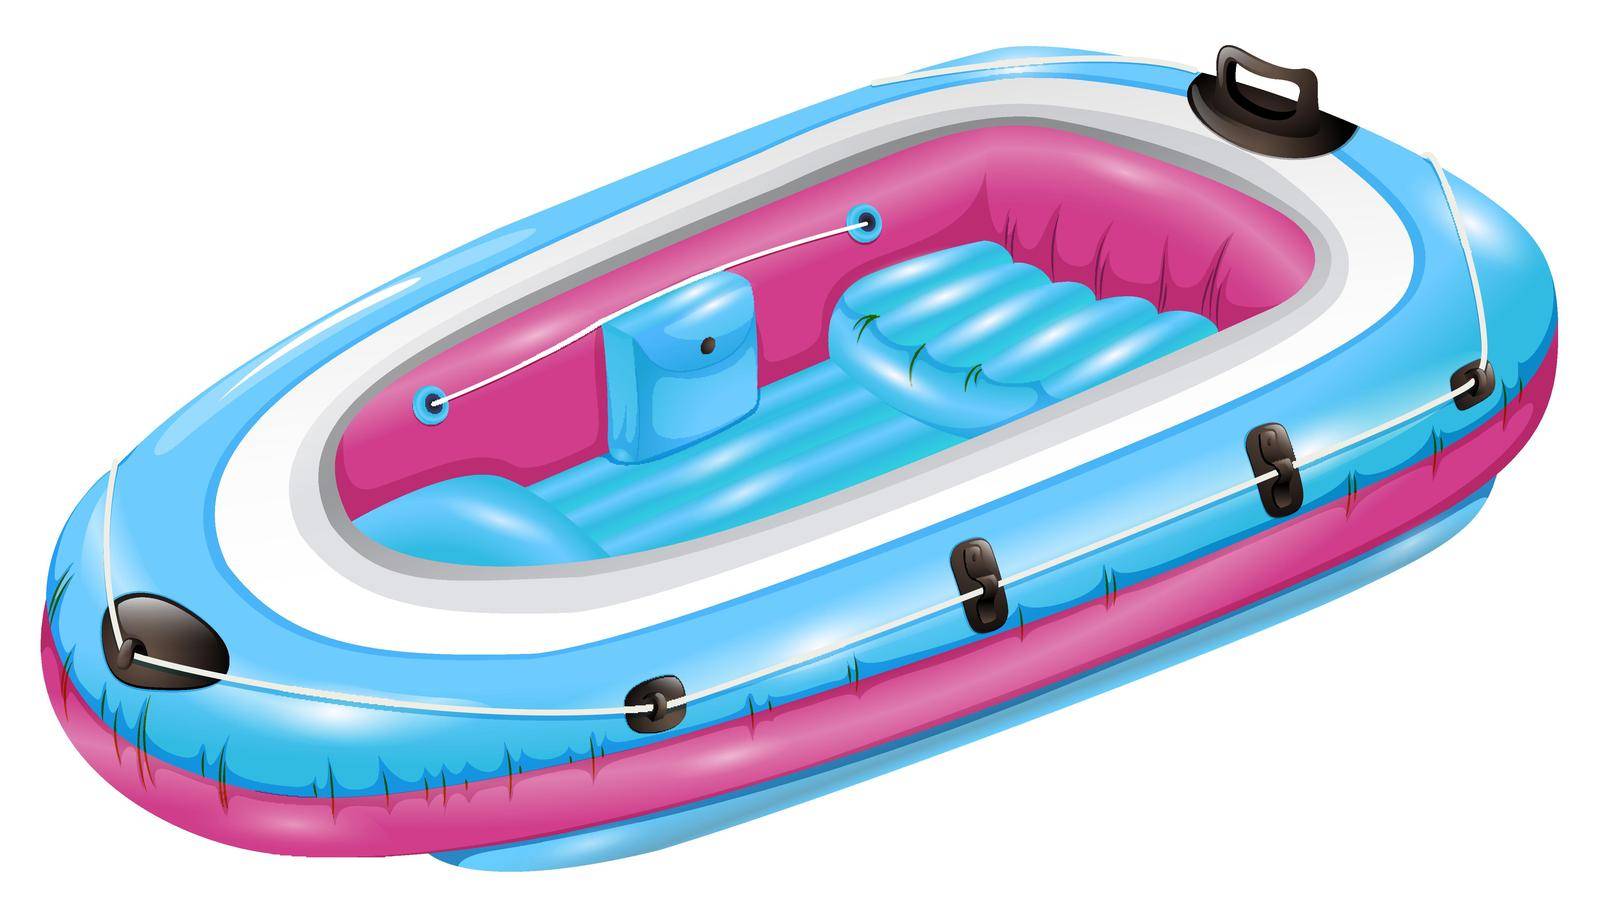 Blue and pink rubber boat on a white background